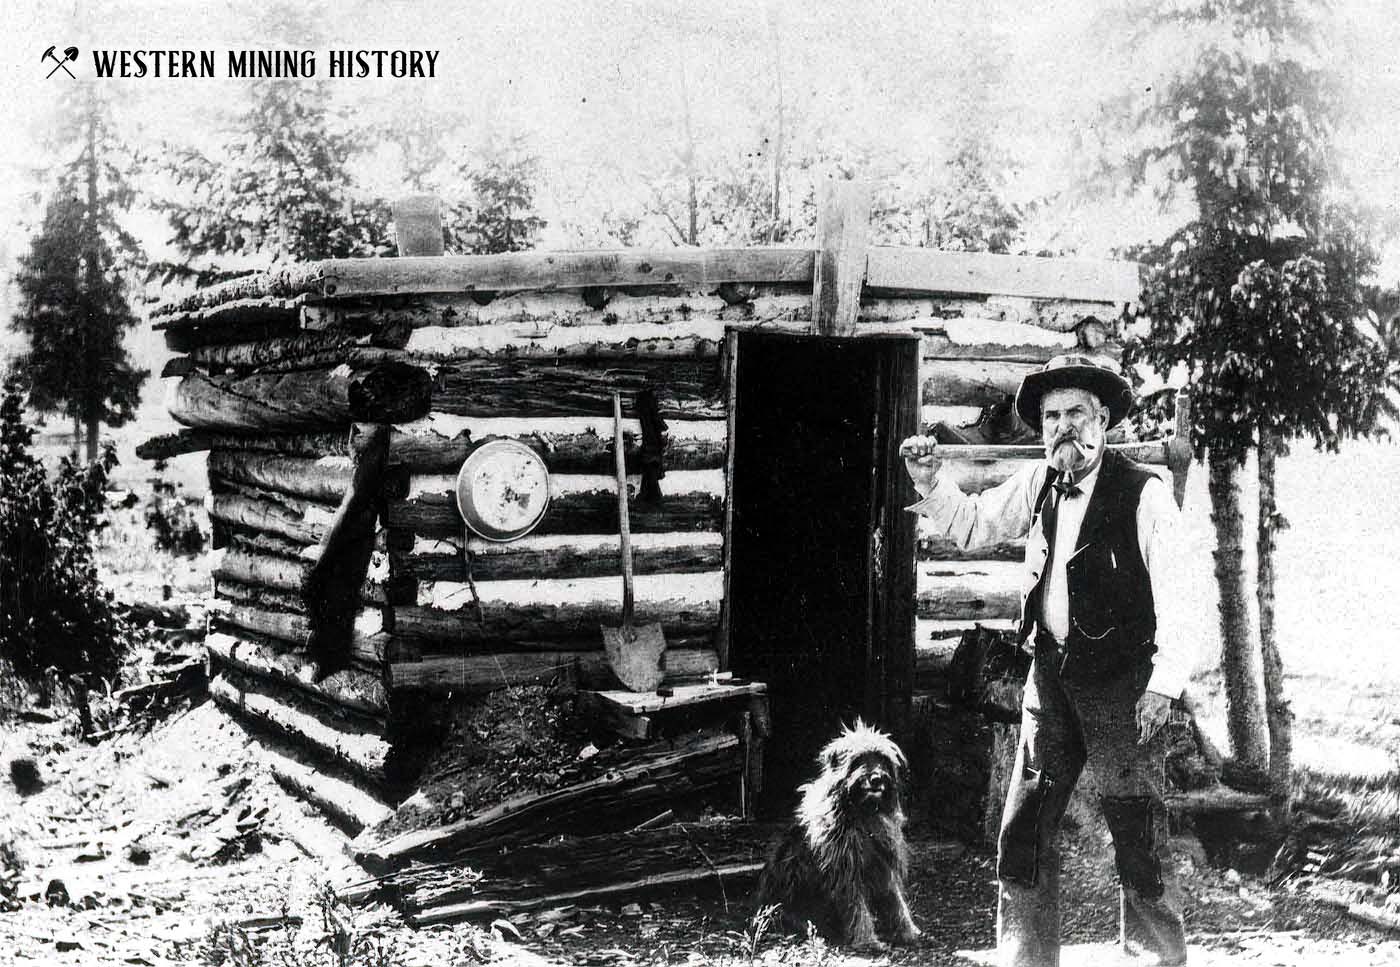 Old Man Topping and the first log cabin in Cripple Creek ca. 1891